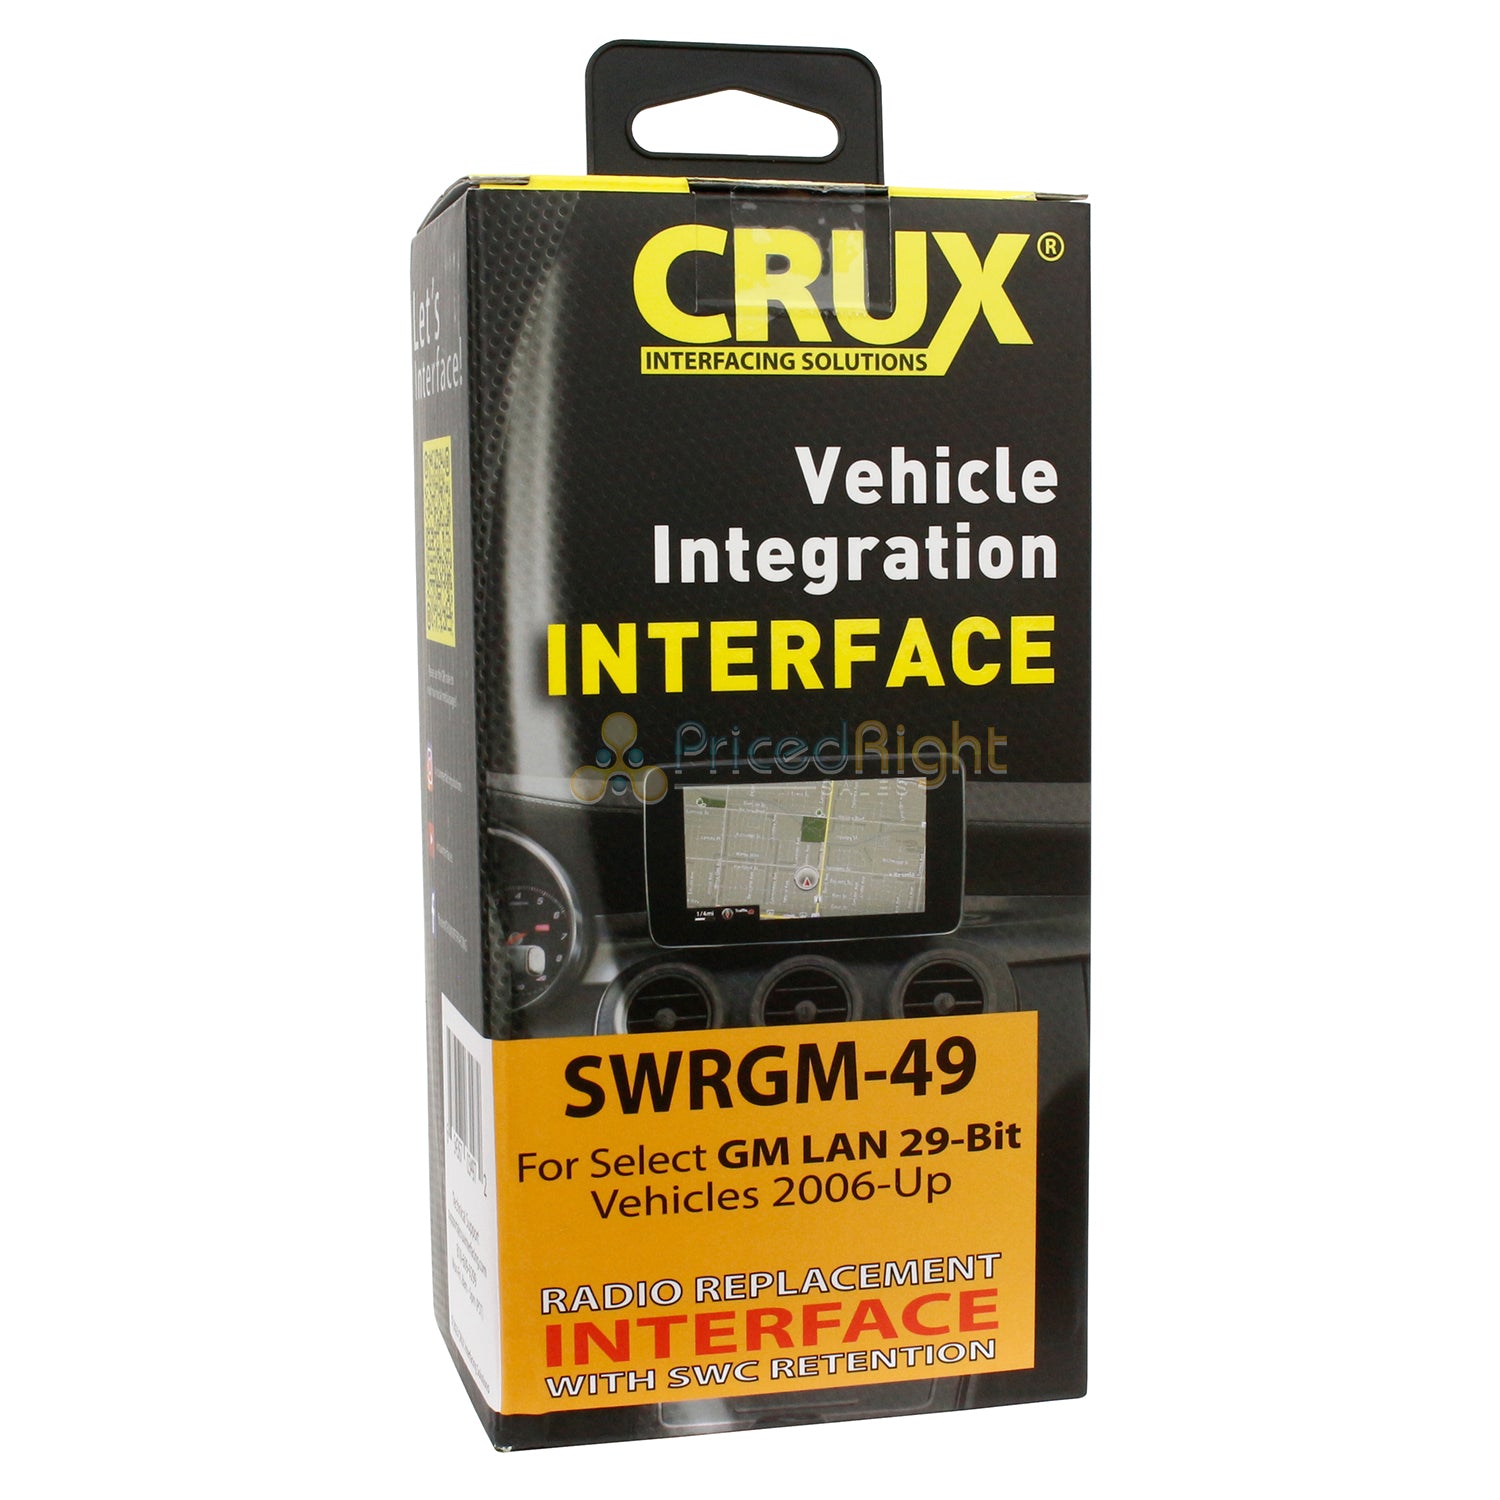 Crux SWRGM-49 Radio Replacement Interface For Select 2006-Up General Motors